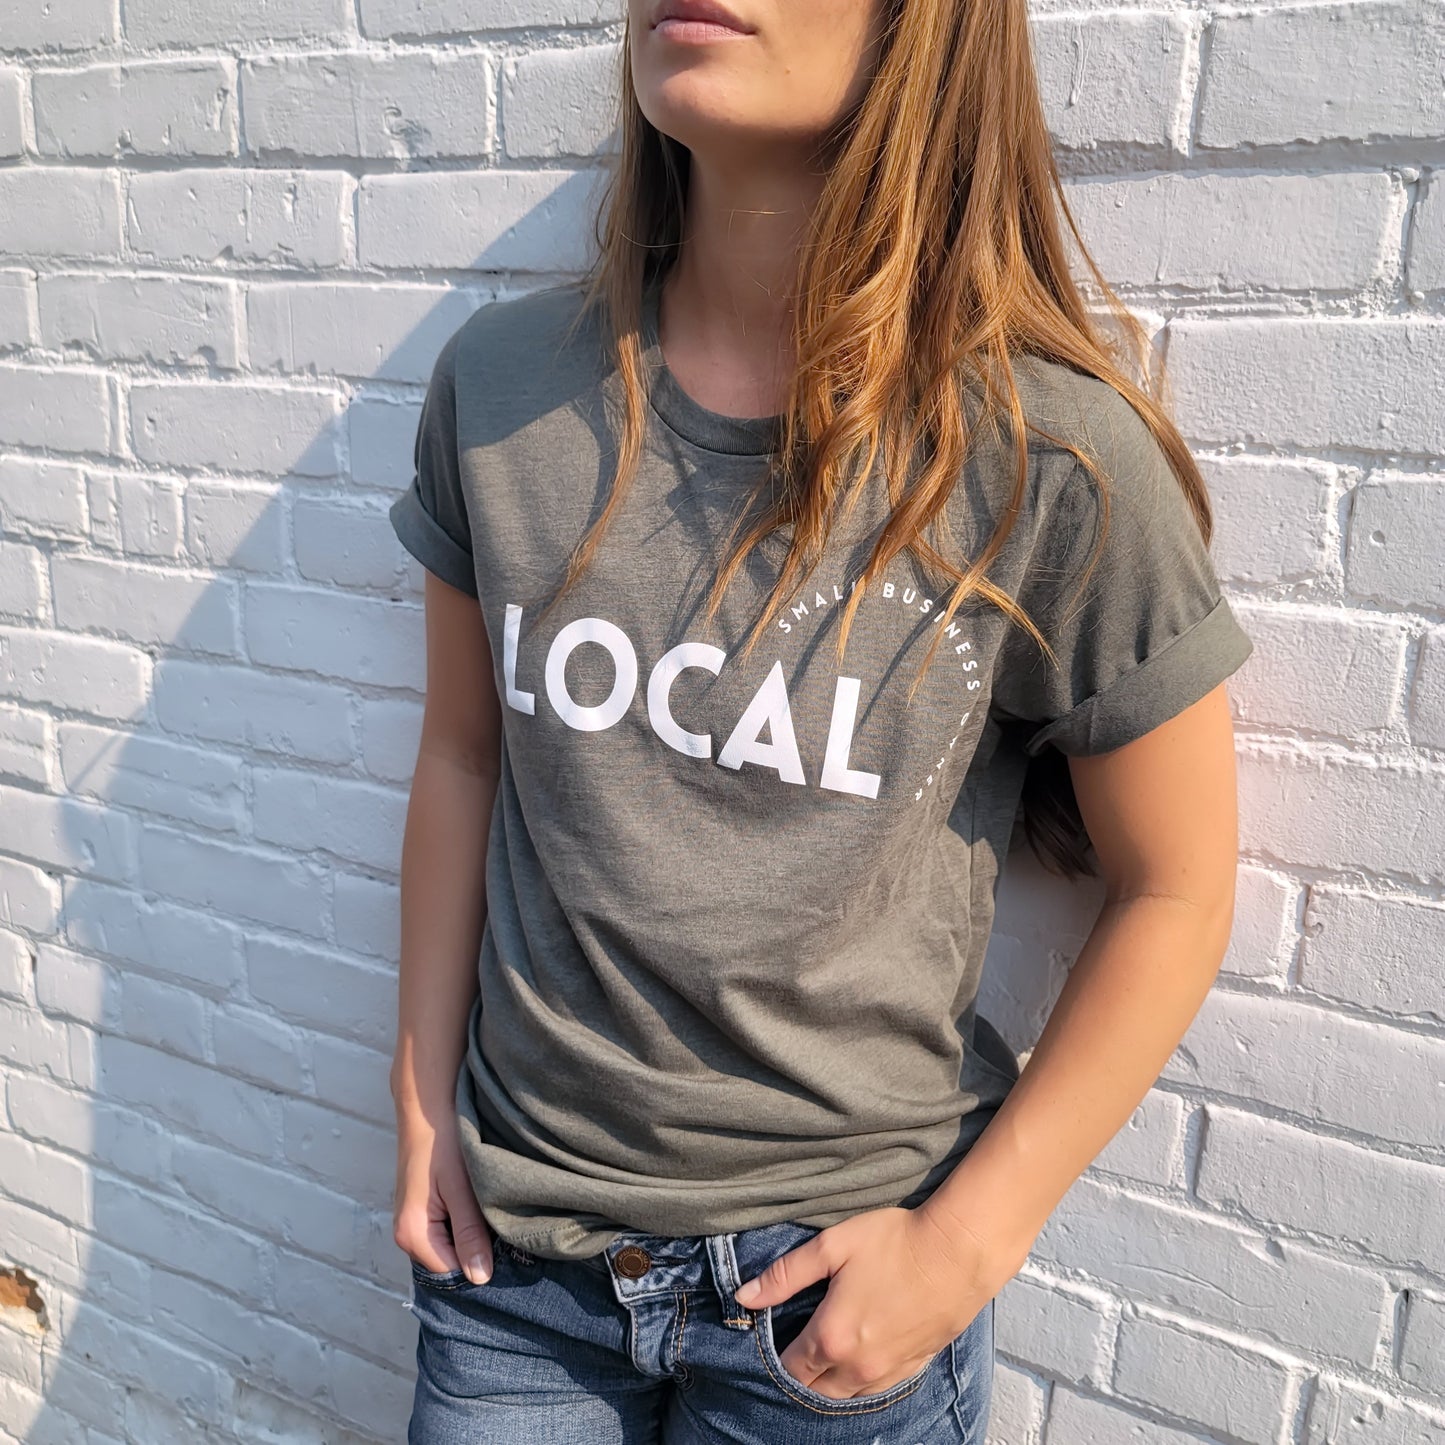 LOCAL SMALL BUSINESS OWNER T-SHIRT - ARMY GREEN - LOCAL LABEL x REPUBLIC WEST COLLAB